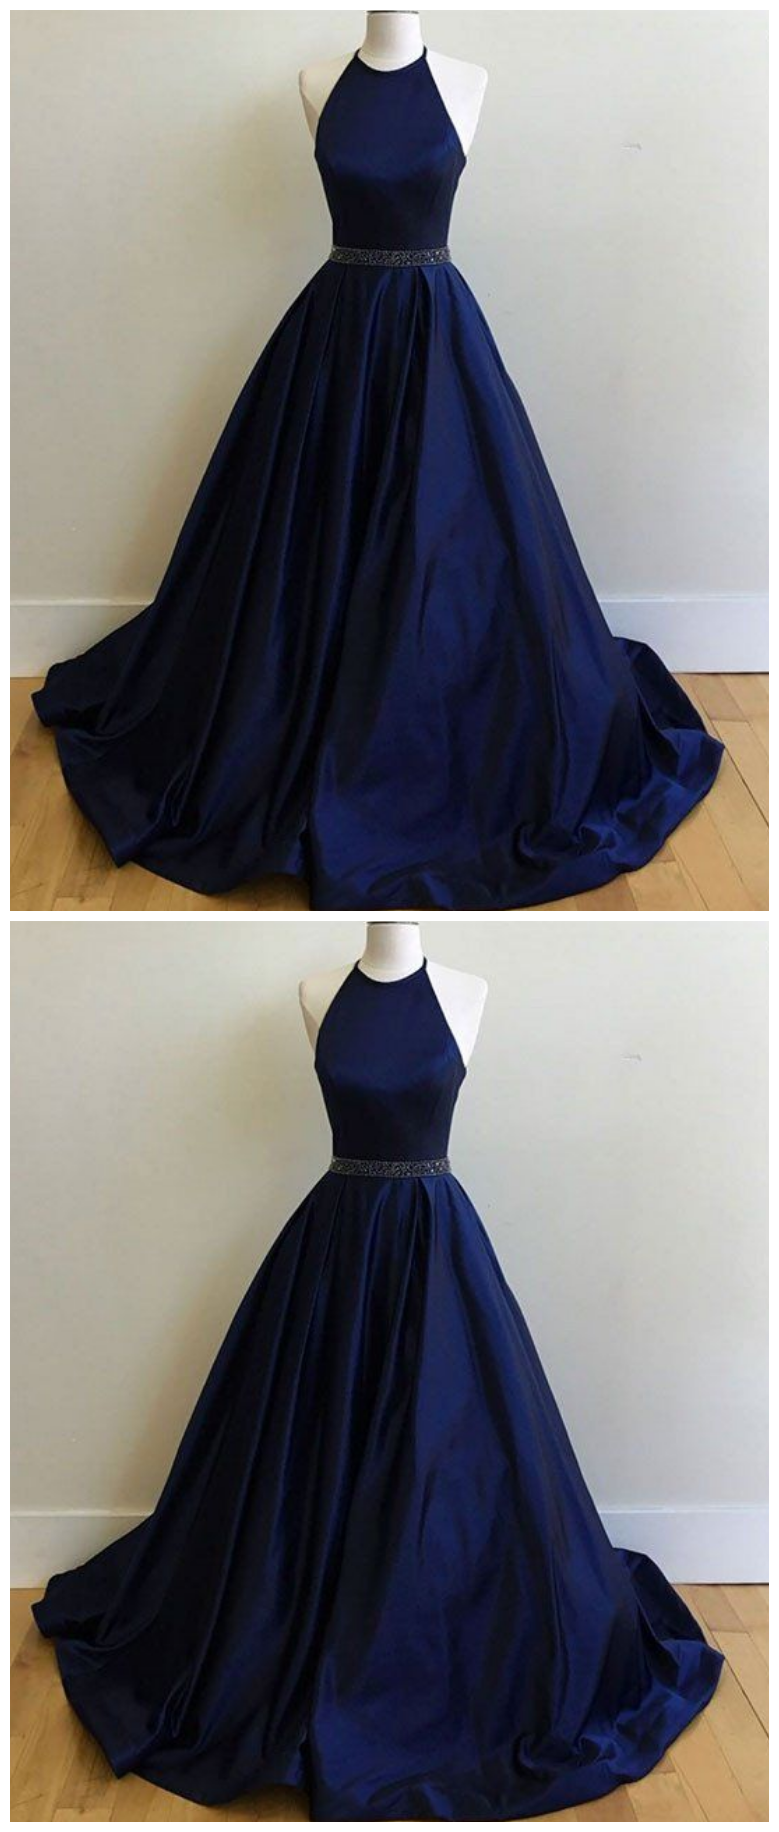 Charming Prom Dress,sexy Prom Dress, Simple Halter Prom Dress, Navy Prom Dresses, Ball Gowns